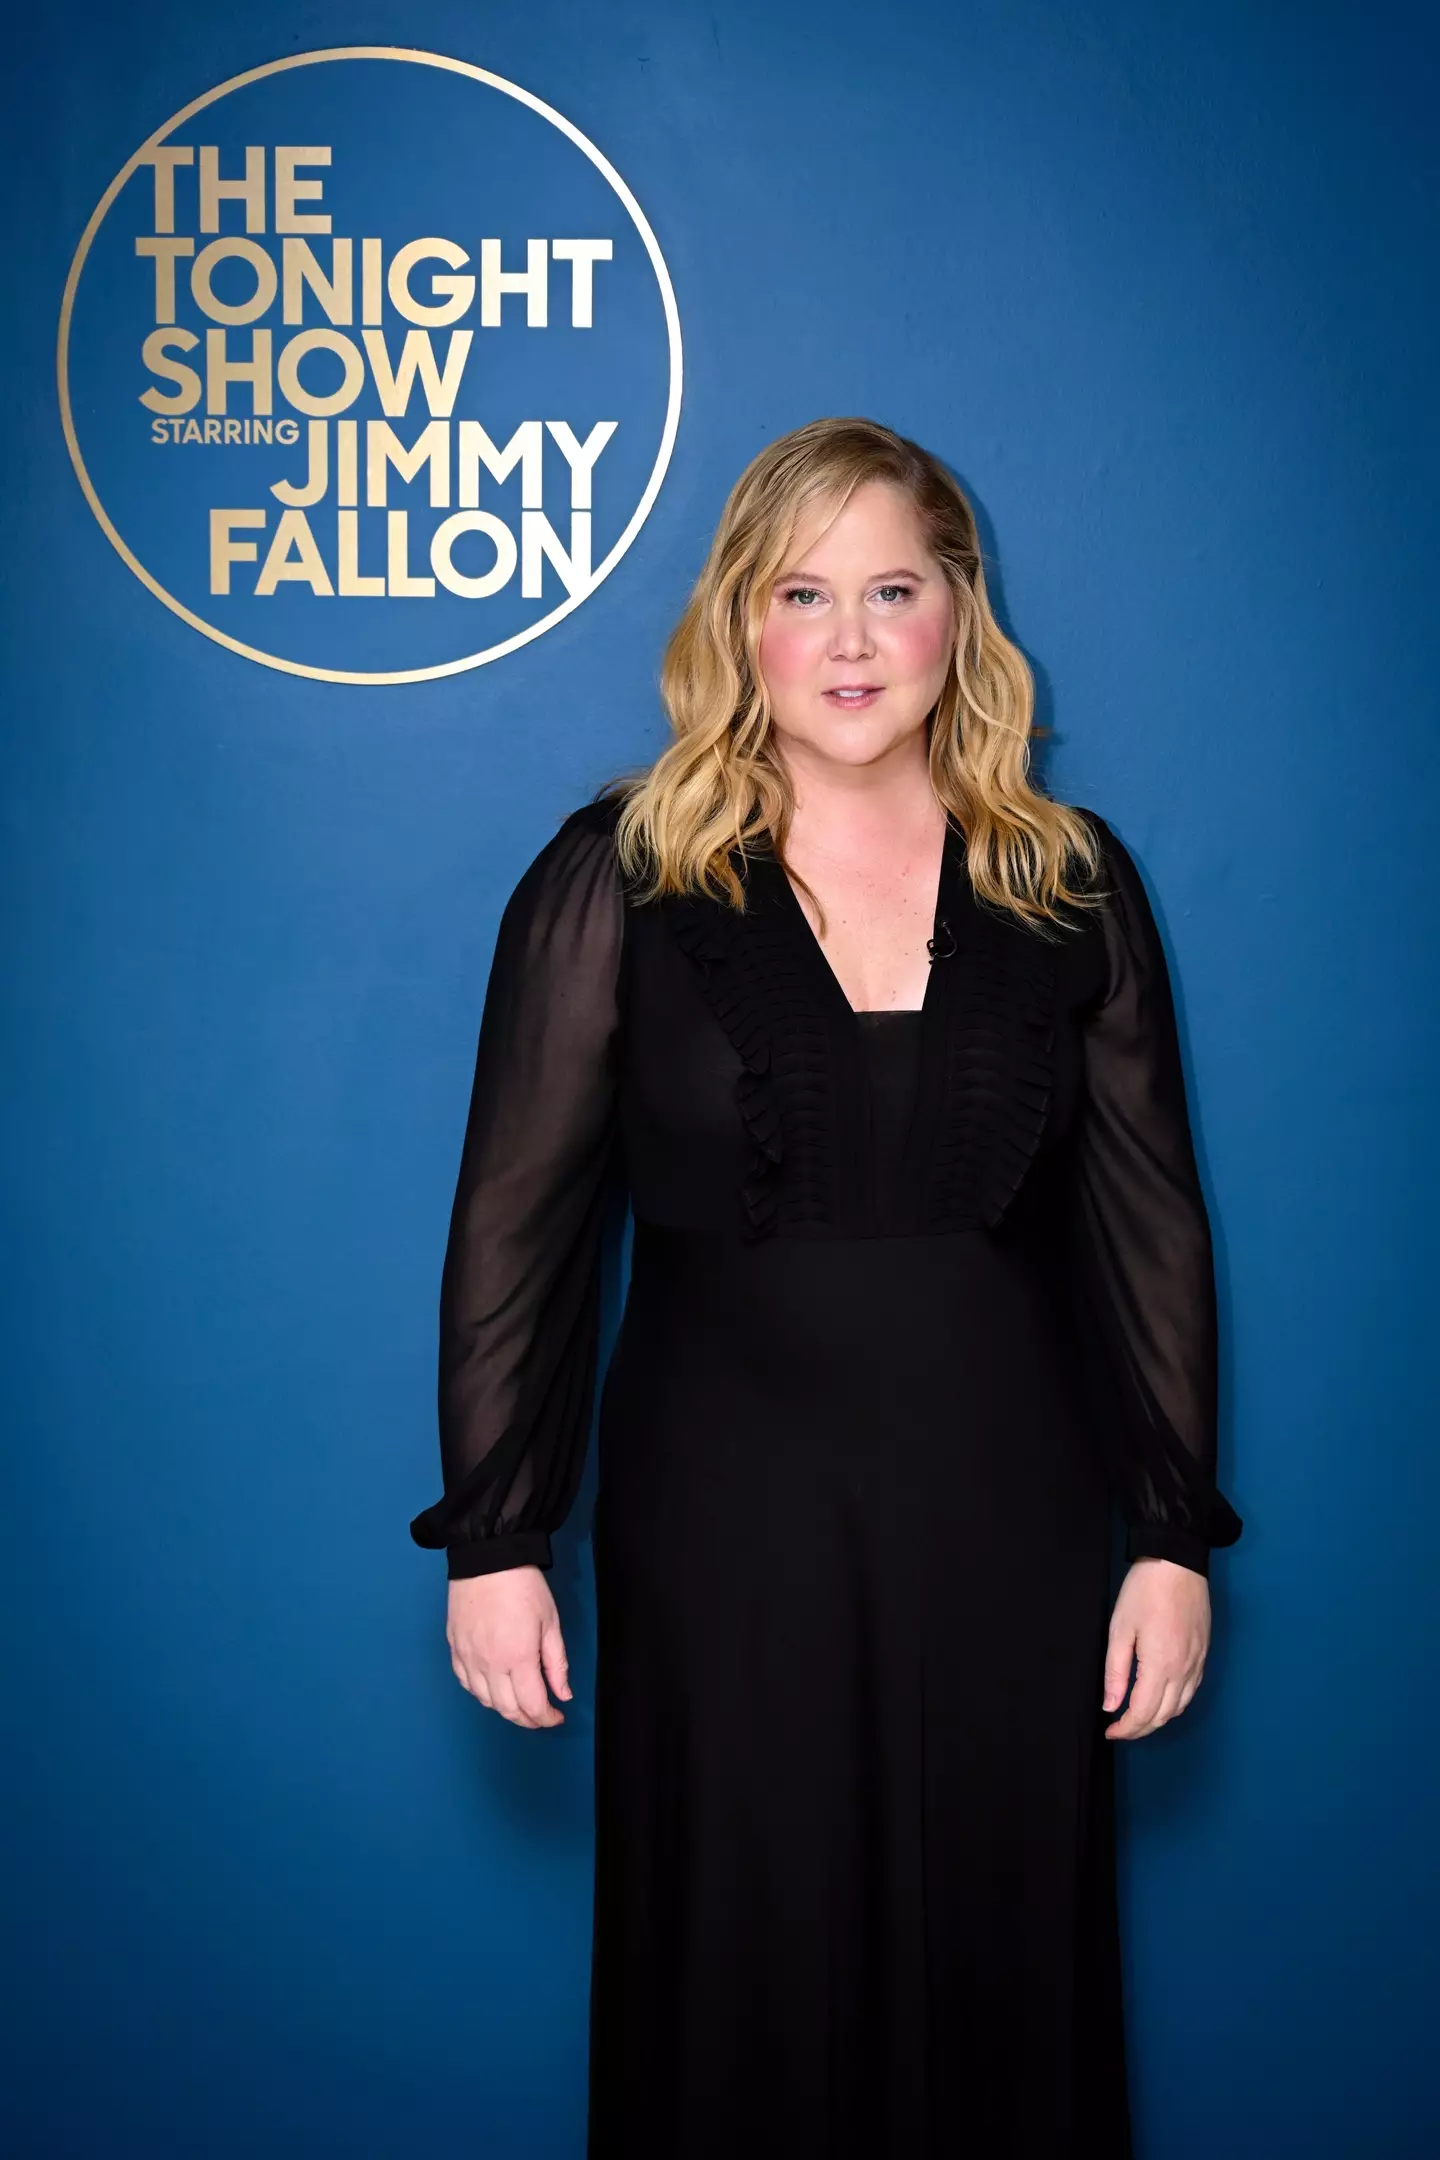 Amy Schumer has hit back at people who commented on her appearance.